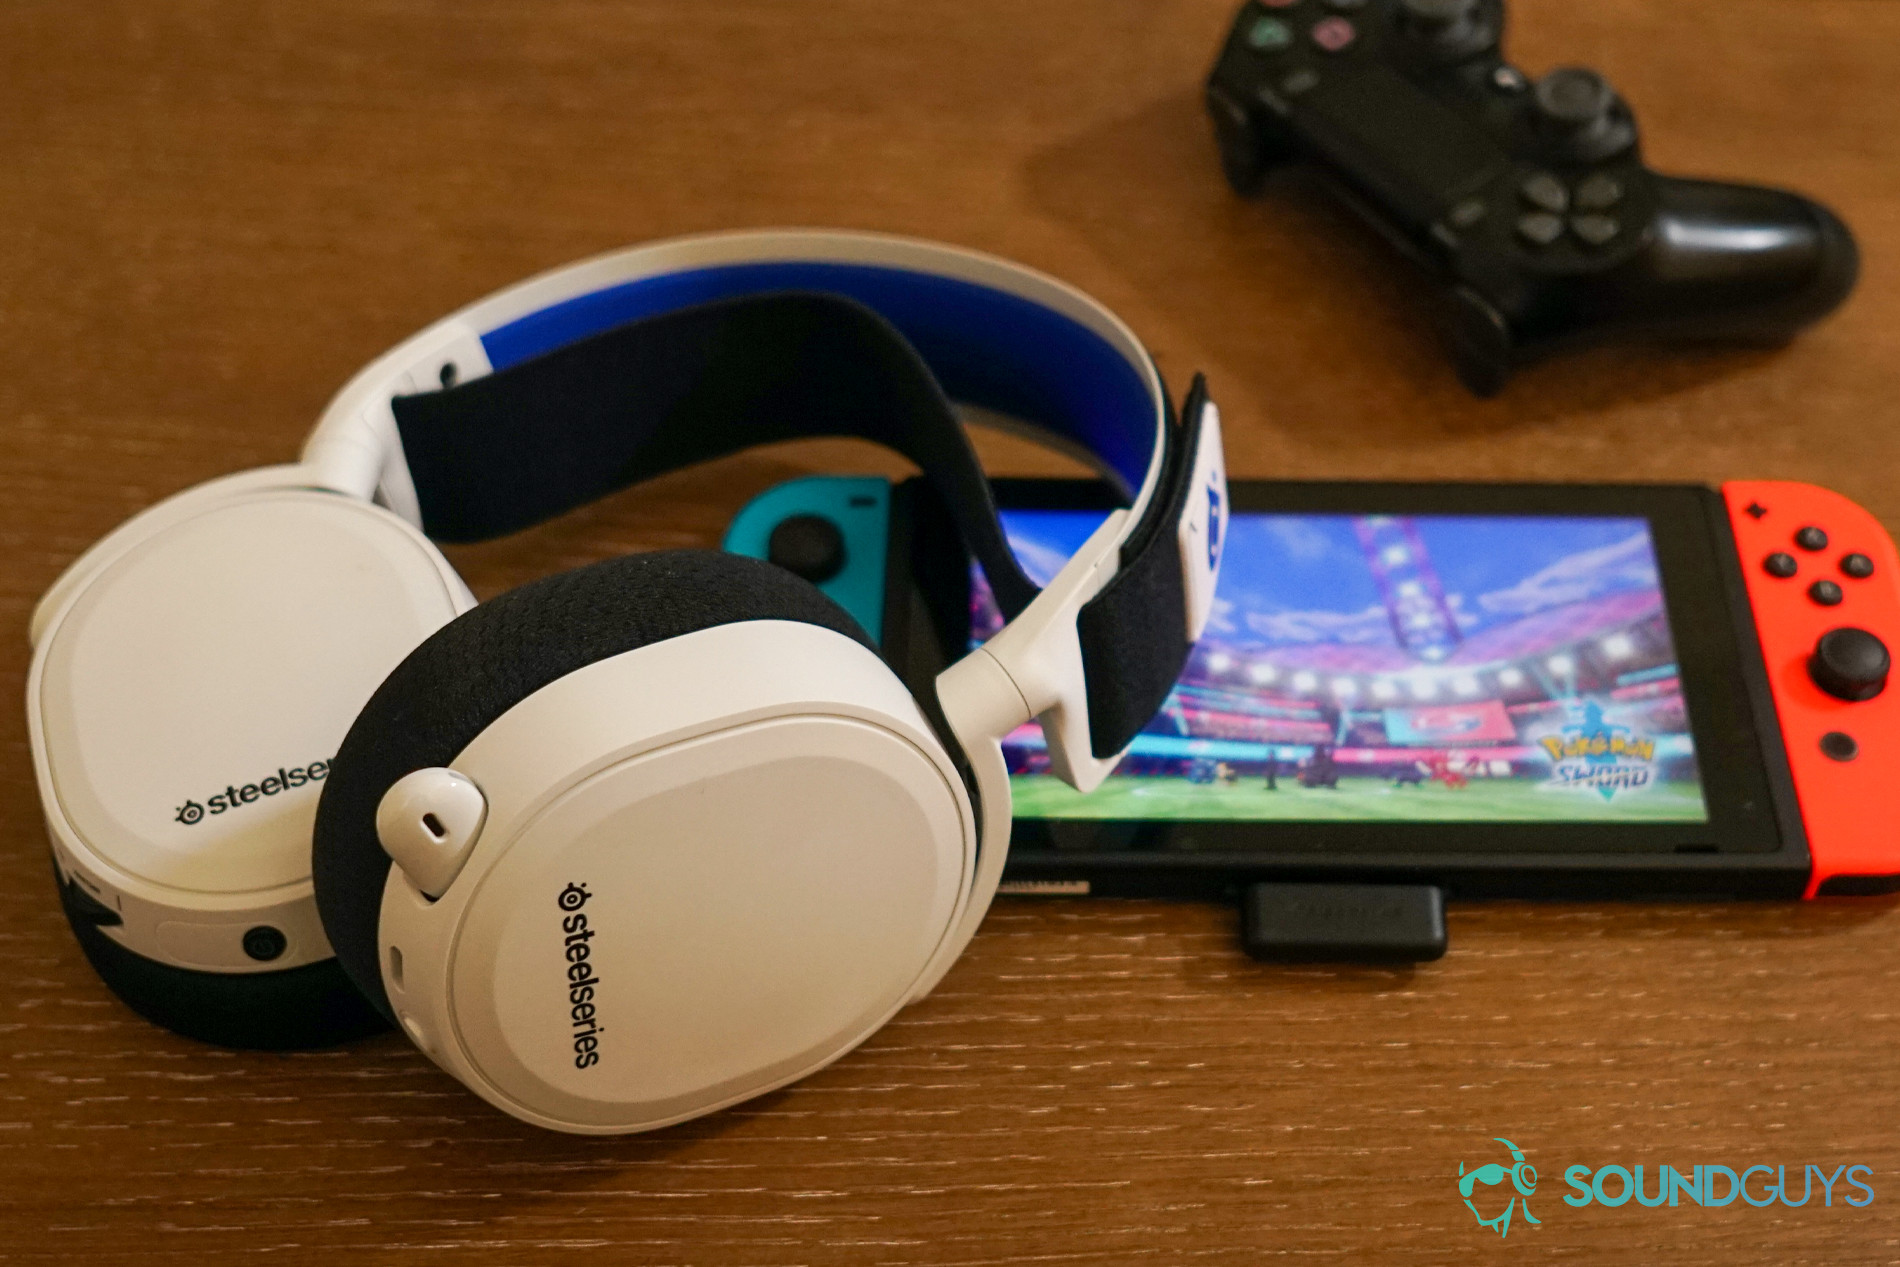 The SteelSeries Arctis 7P lays on top of a Nintendo Switch running Pokemon Sword, which its wireless USB-C dongle is plugged into, with a PlayStation DualShock 4 controller in the background.